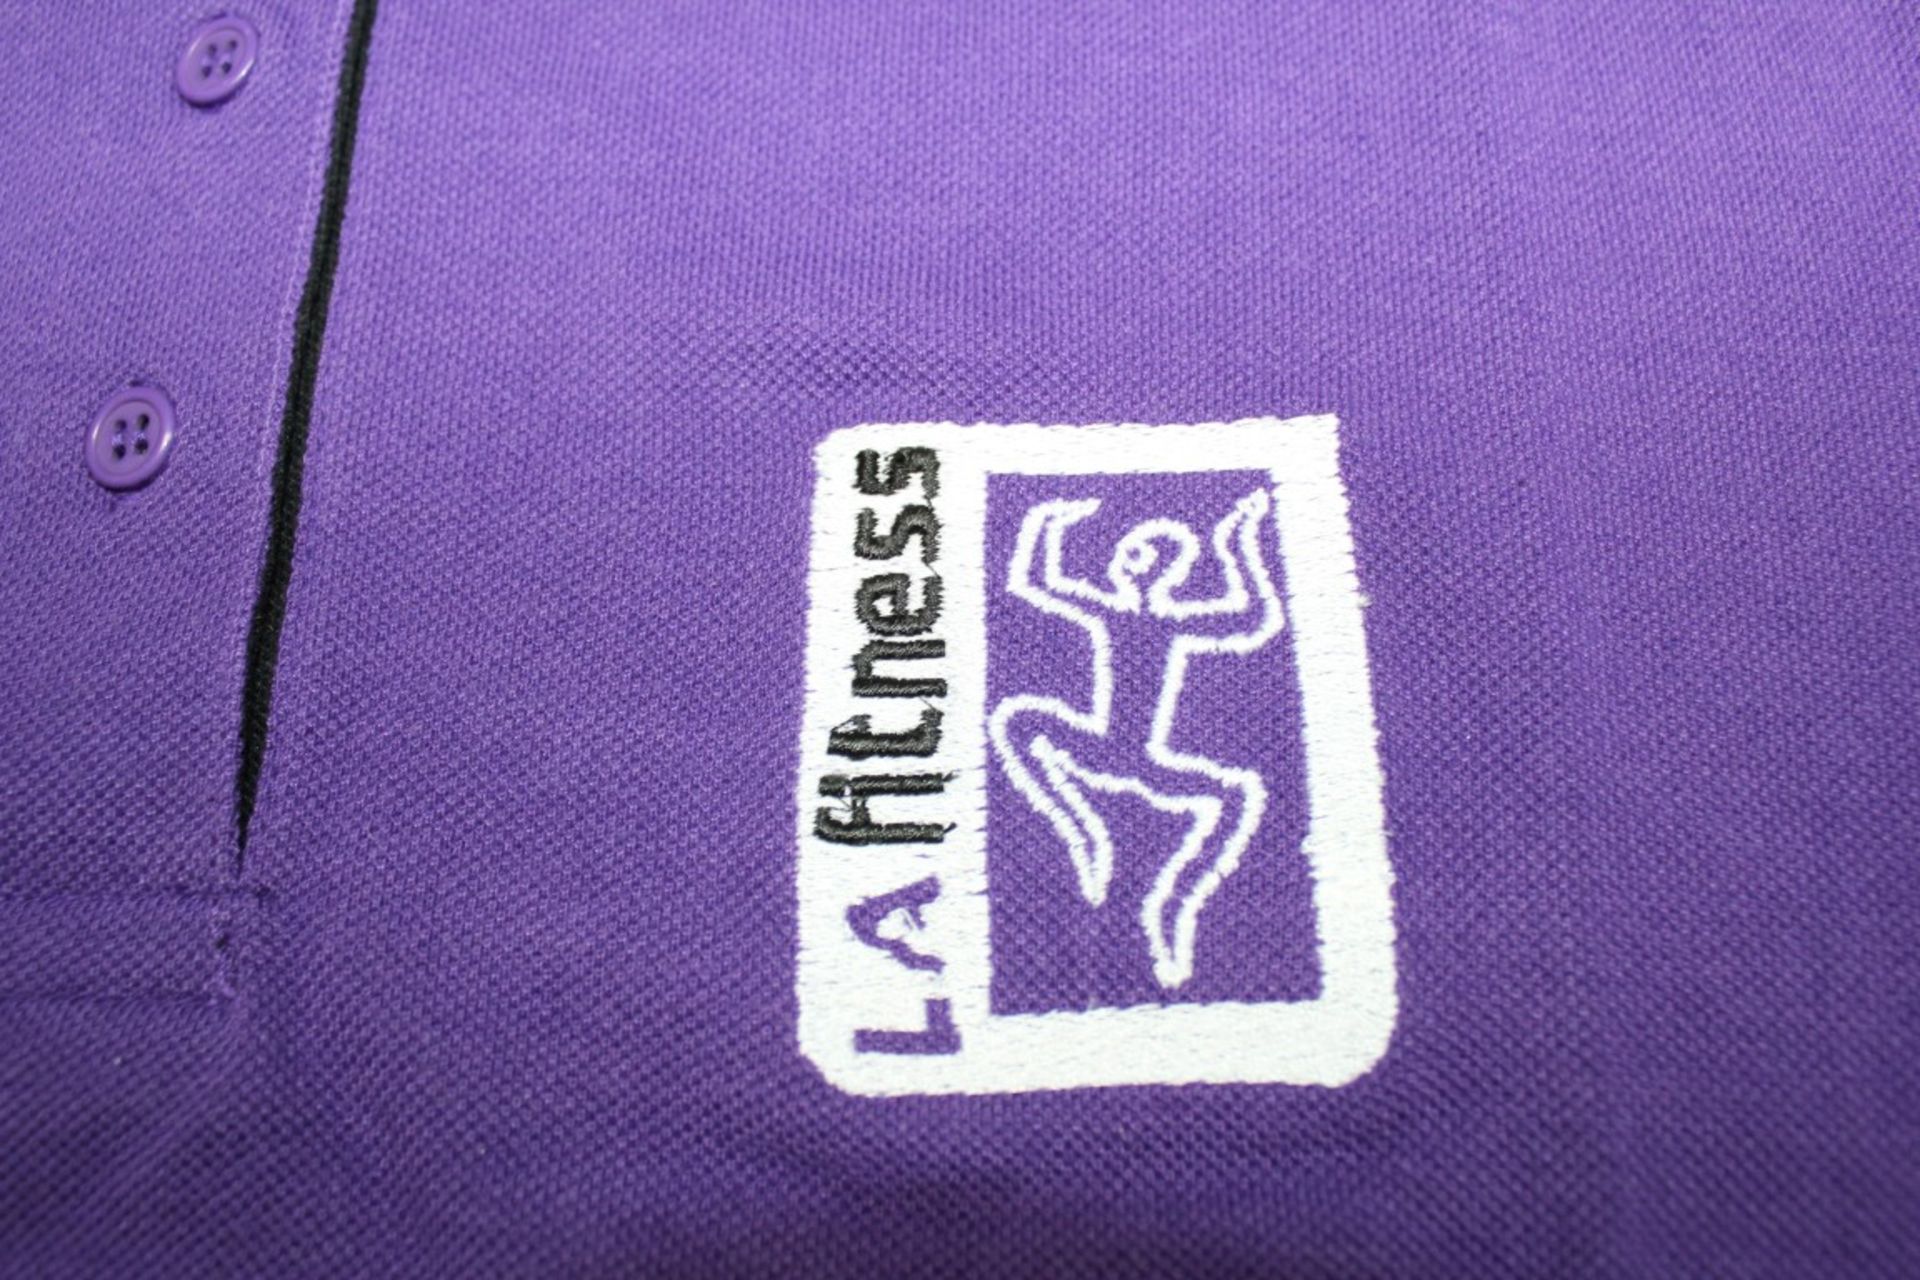 23 x LA FITNESS Branded Ladies Polo Shirts - All X-Large - Colour: Purple / Black - New & Sealed - Image 3 of 4